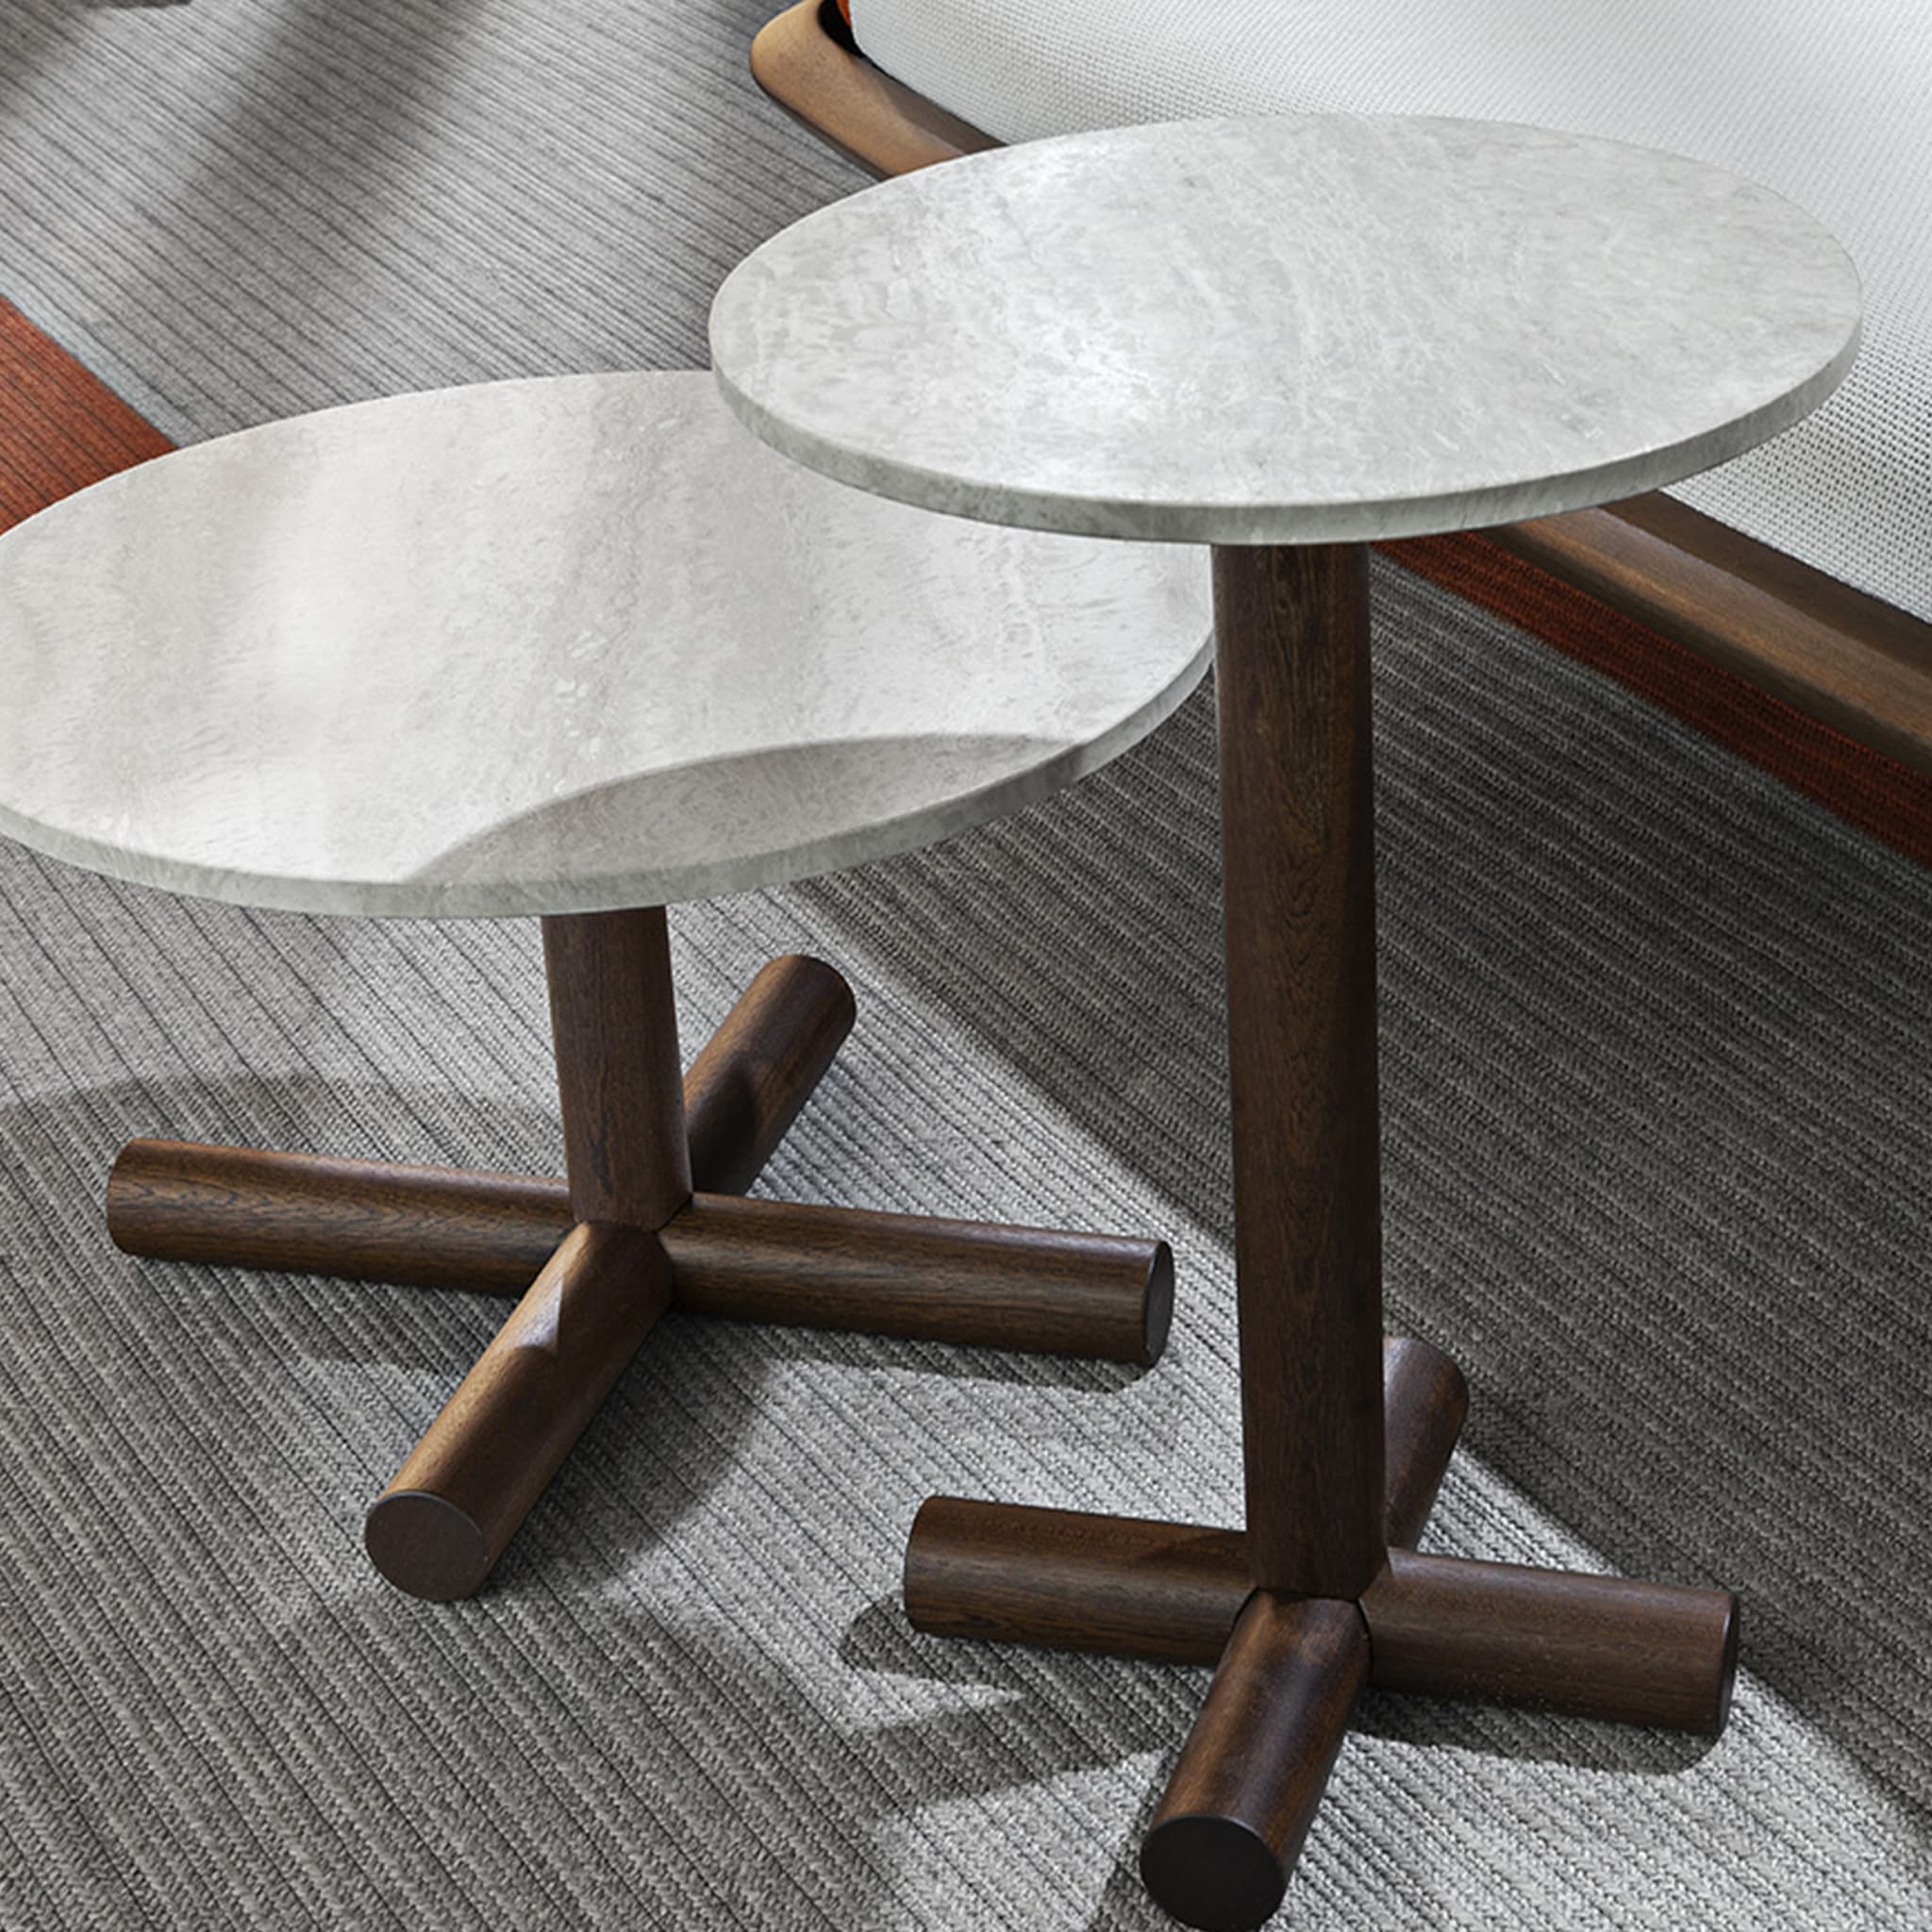 Helix 50 Coffee Table by Massimo Castagna - Alternative view 1